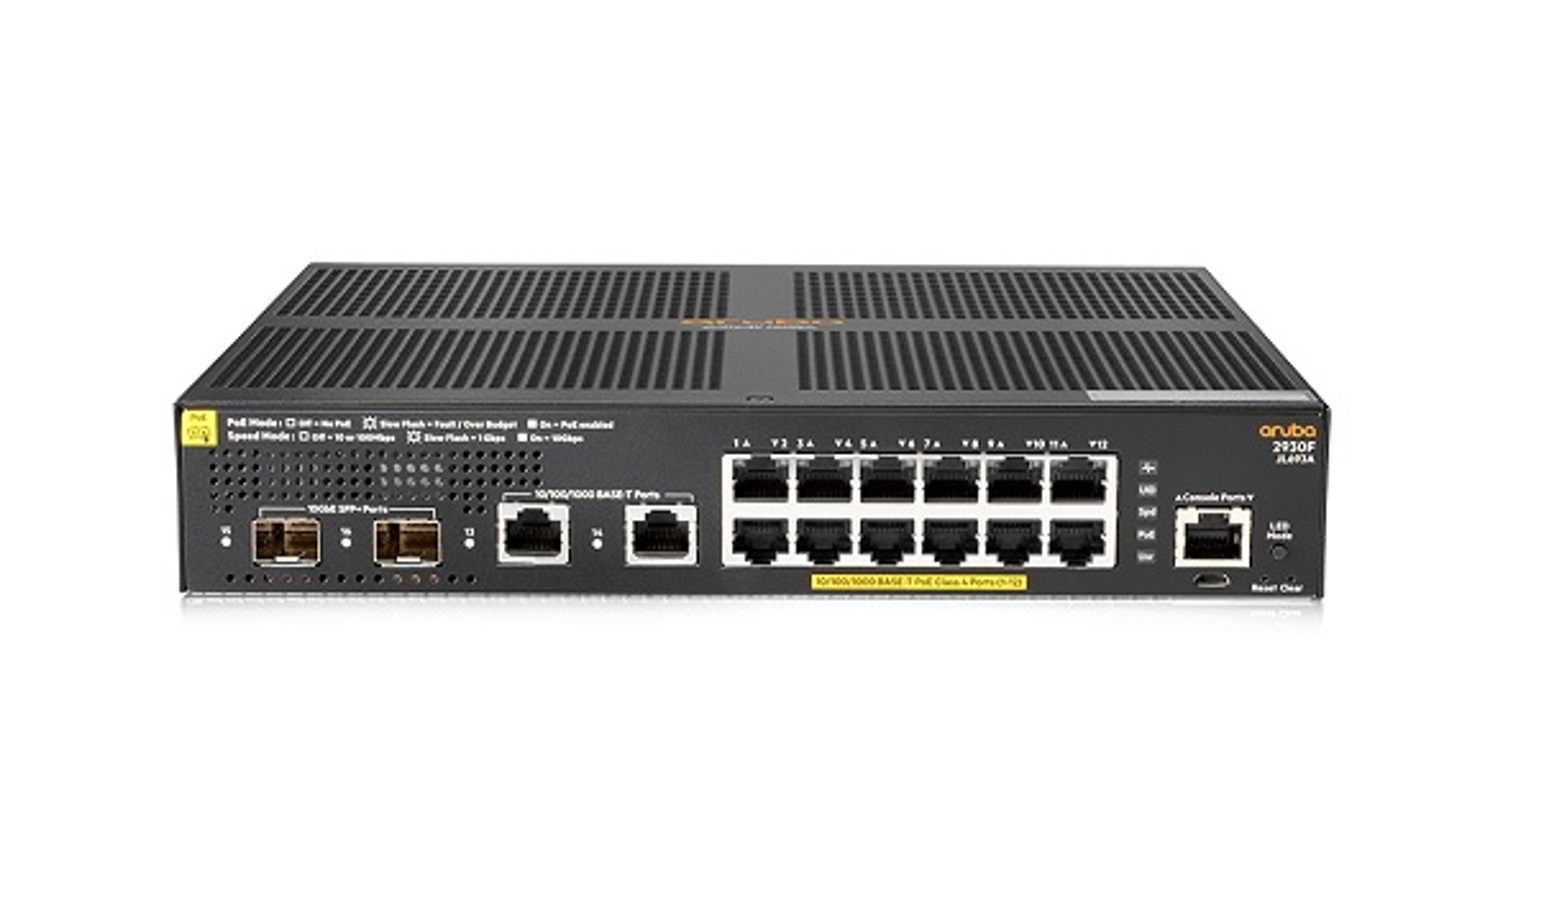 HP Aruba 2930F 12G PoE+ Layer 3 Managed Switch with 2 x 1Gbps SFP+ Ports